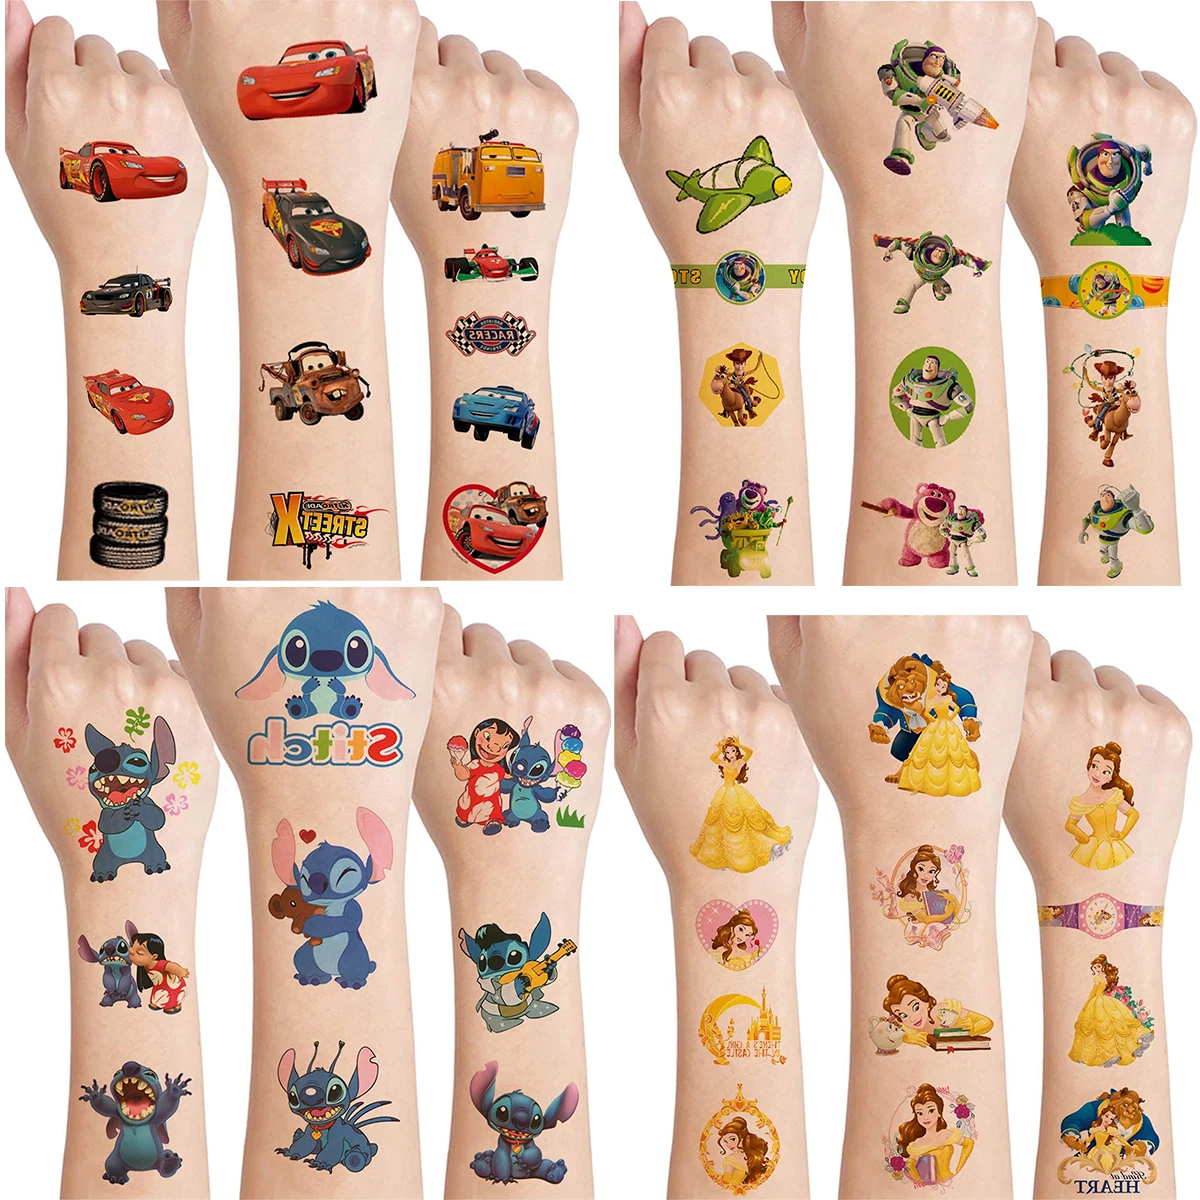 

Disney Pixar Toy Story Birthday Party Favors Stickers Pack Frozen Princess Tattoos Minnie Party Supplies for Kids Boys Girls